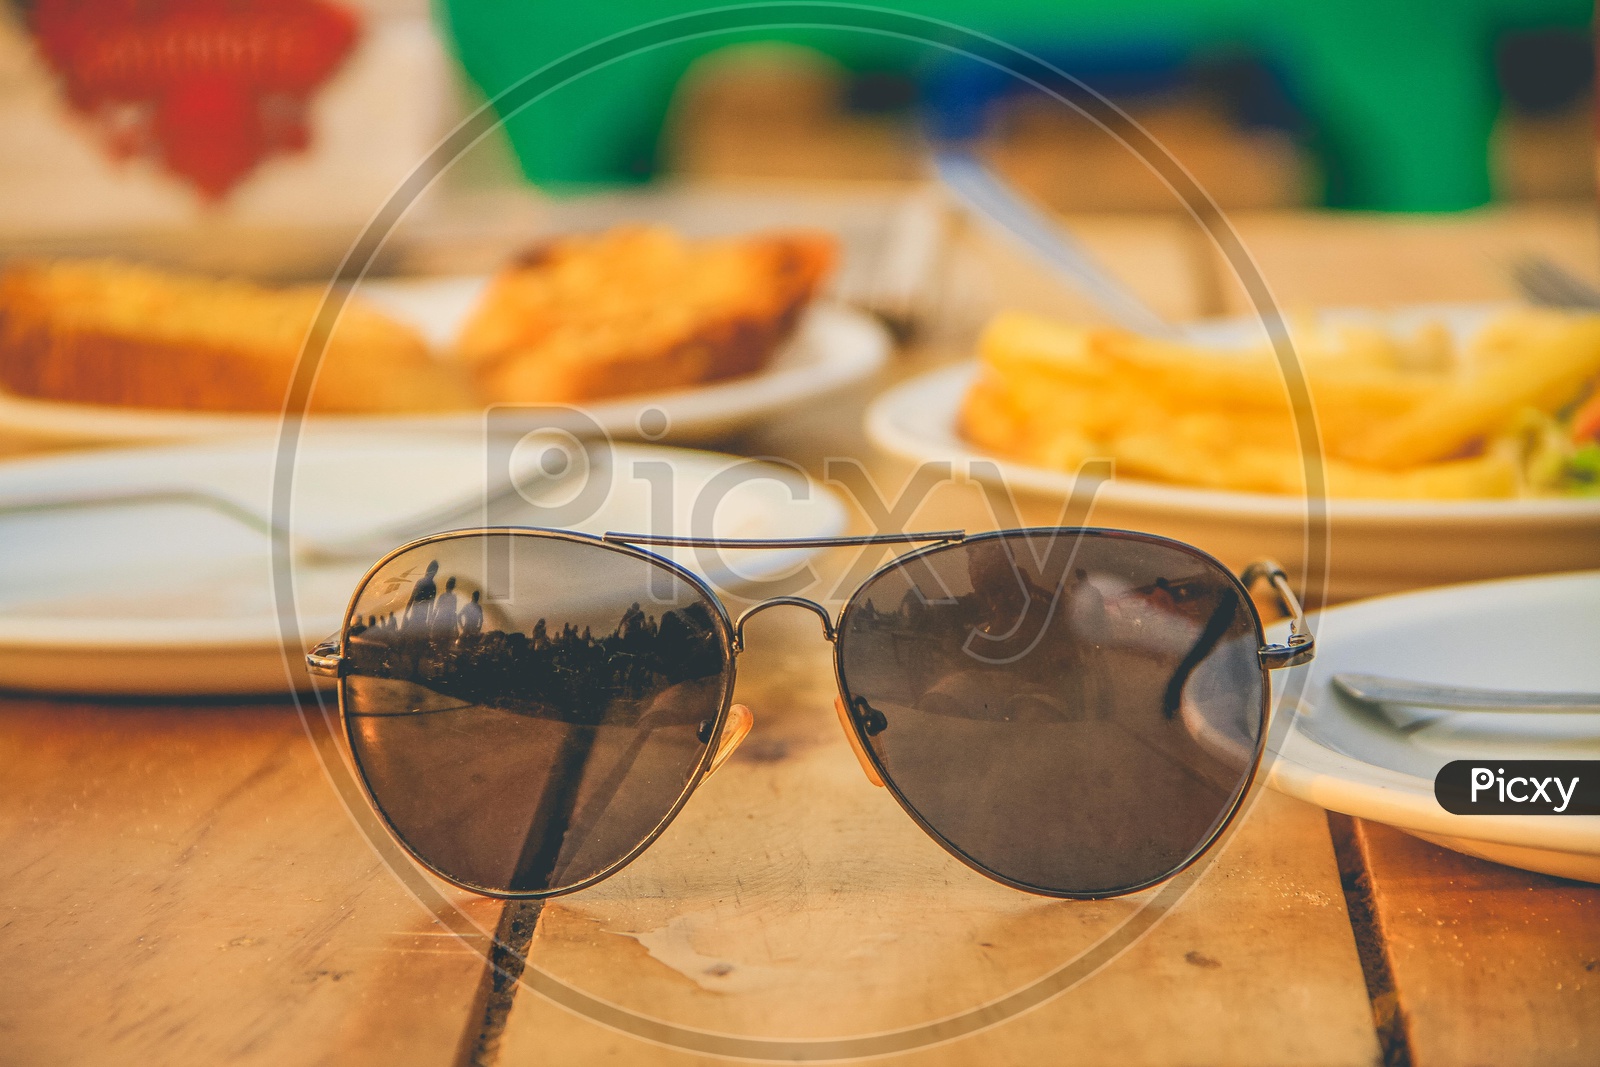 Sunglasses on a wooden table and food in the back